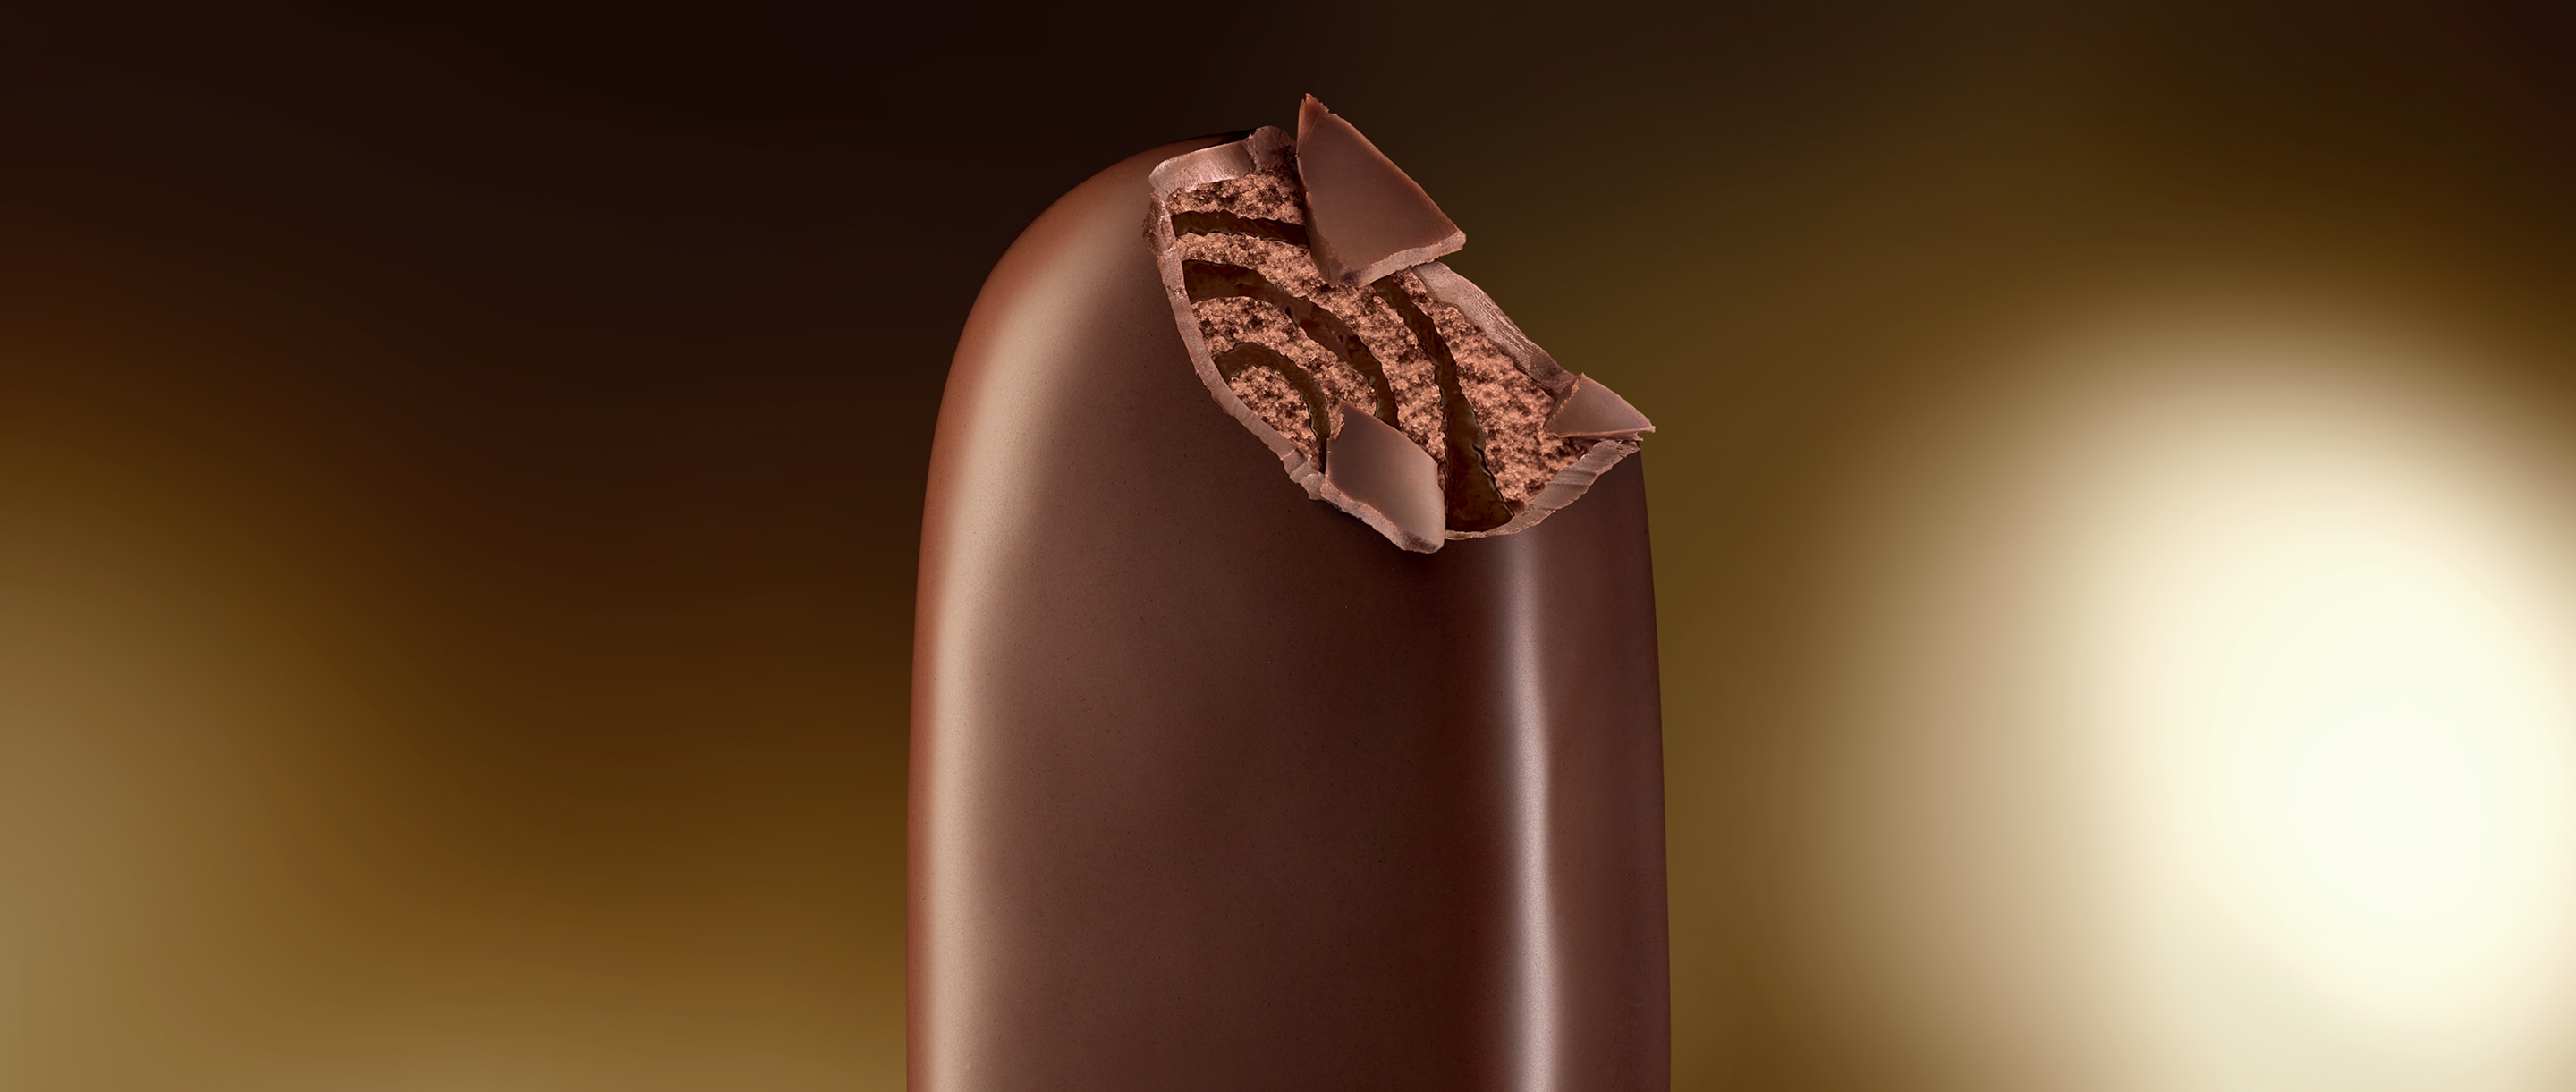 How Is Magnum Chocolate Made? 